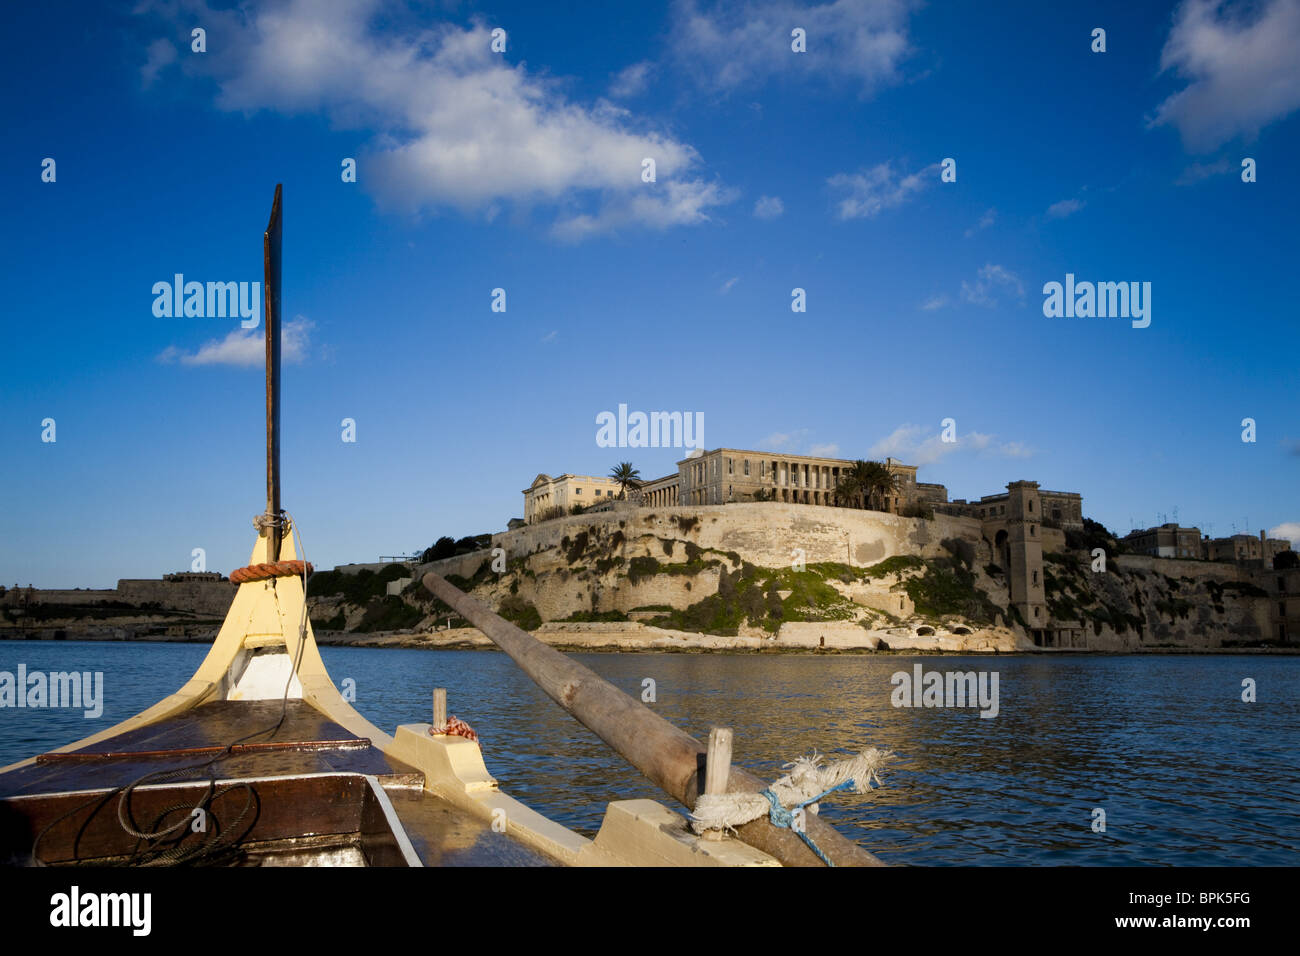 View from a boat at the Grand Harbour and view to the Bighi Centre, Kalkara district, Three Cities, Malta, Europe Stock Photo